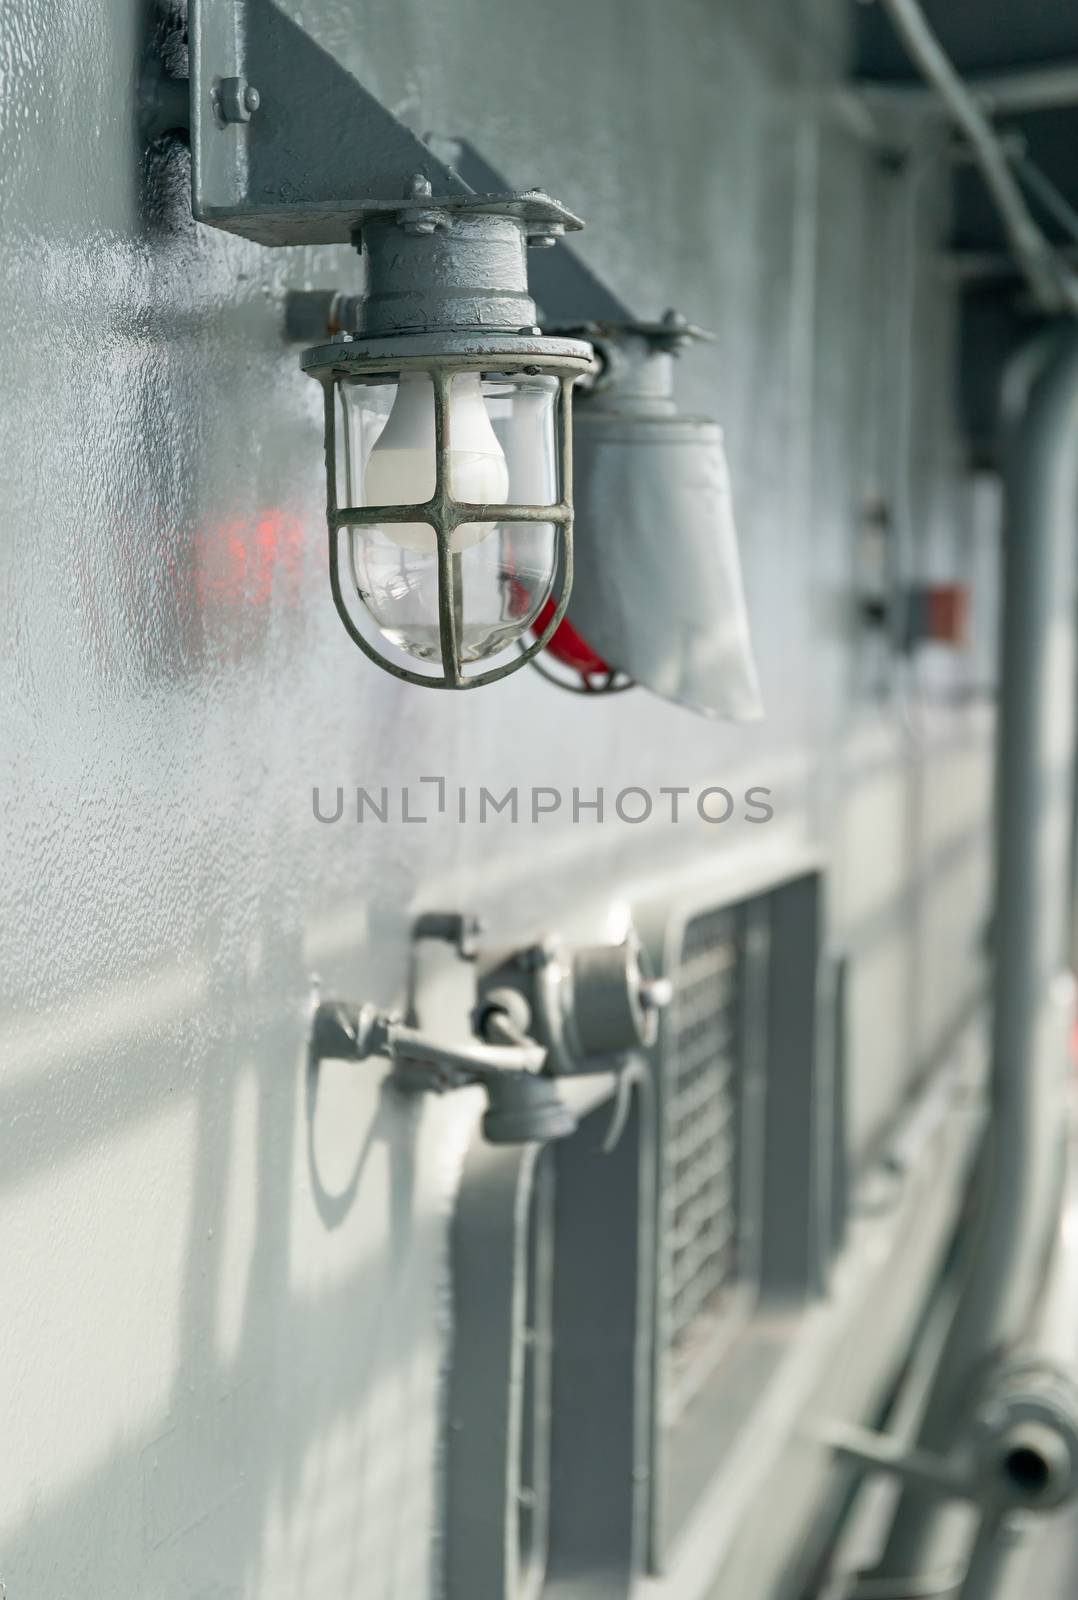 Deck lamp on ship with metal frame fixed in protective cage